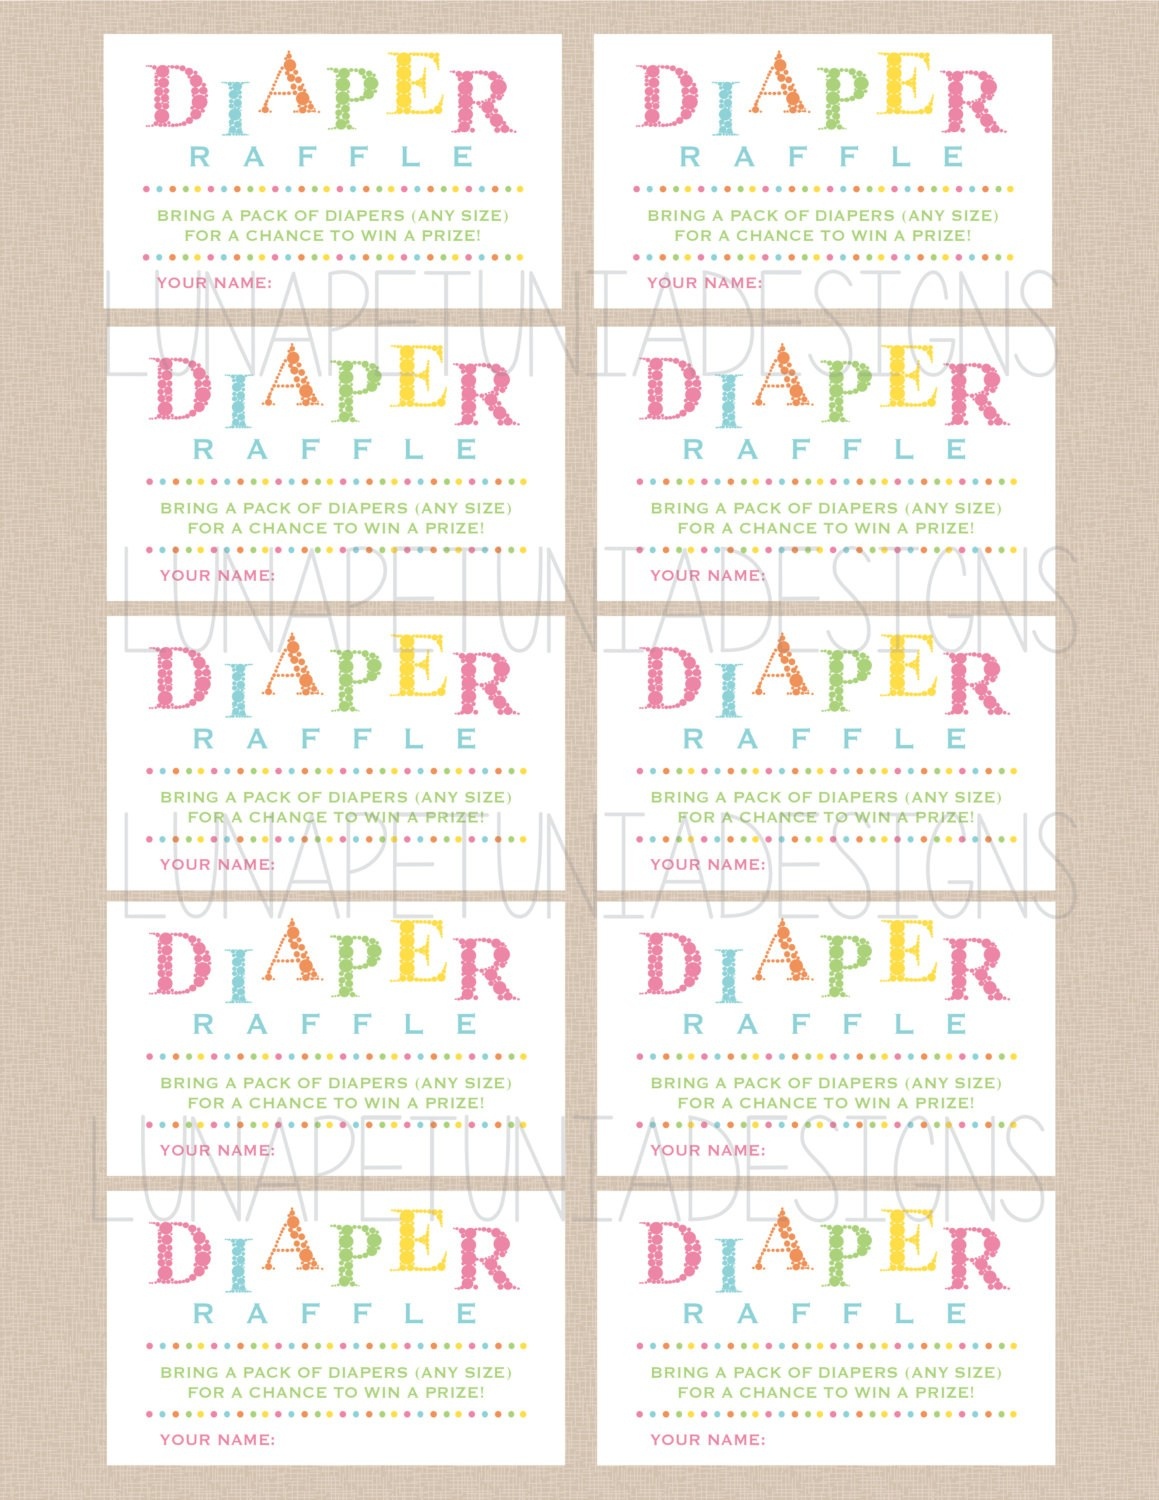 Diaper Raffle Tickets The Highly Effective Strategy To Getting More 